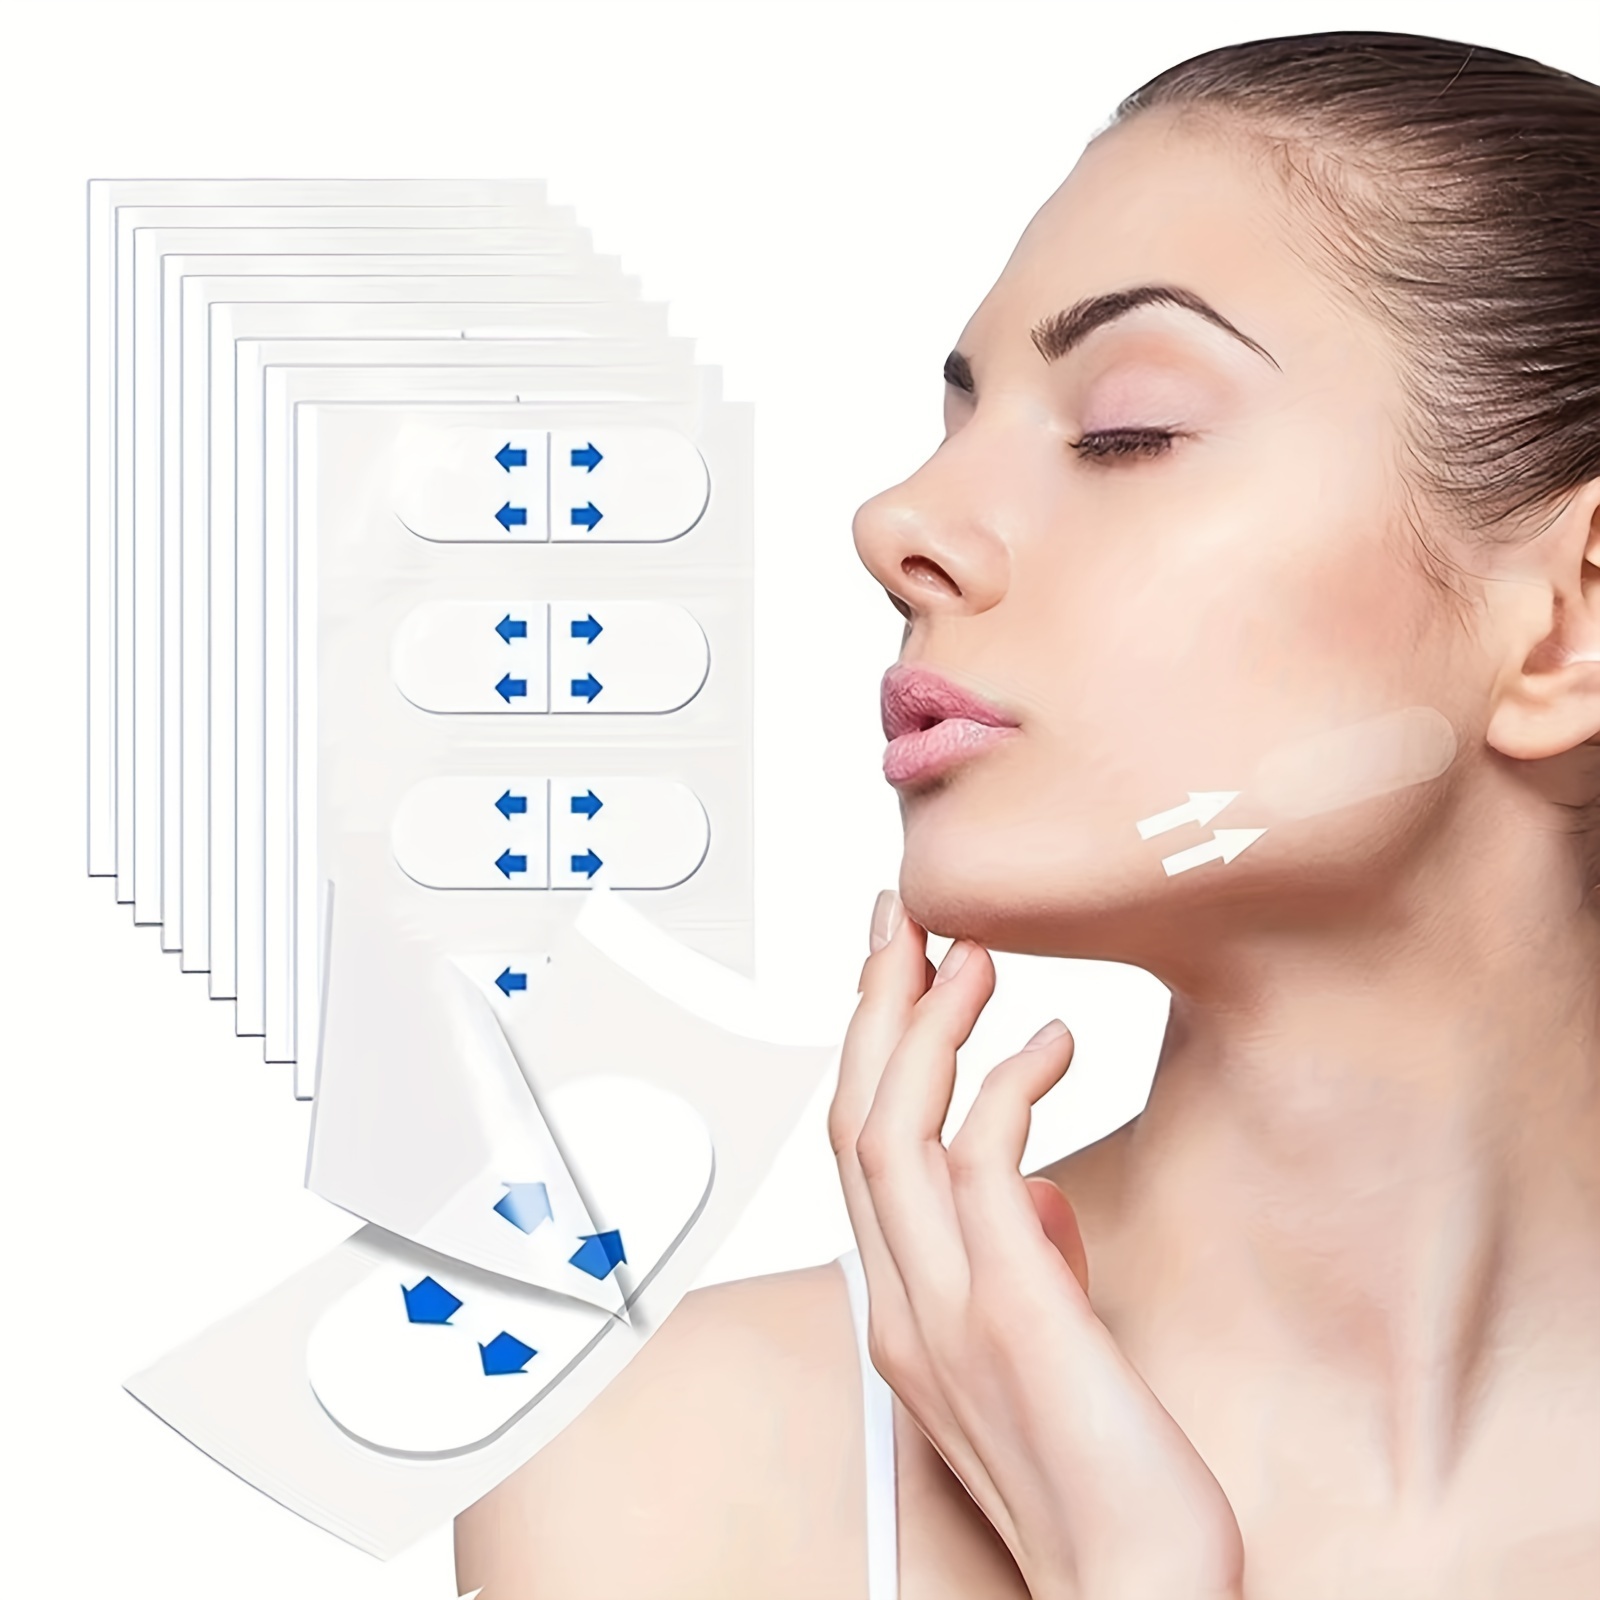  Bring It Up Instant Neck Lift Tape 30 Day Supply, Transparent  Neck Lifting Anti Wrinkle Stickers : Beauty & Personal Care